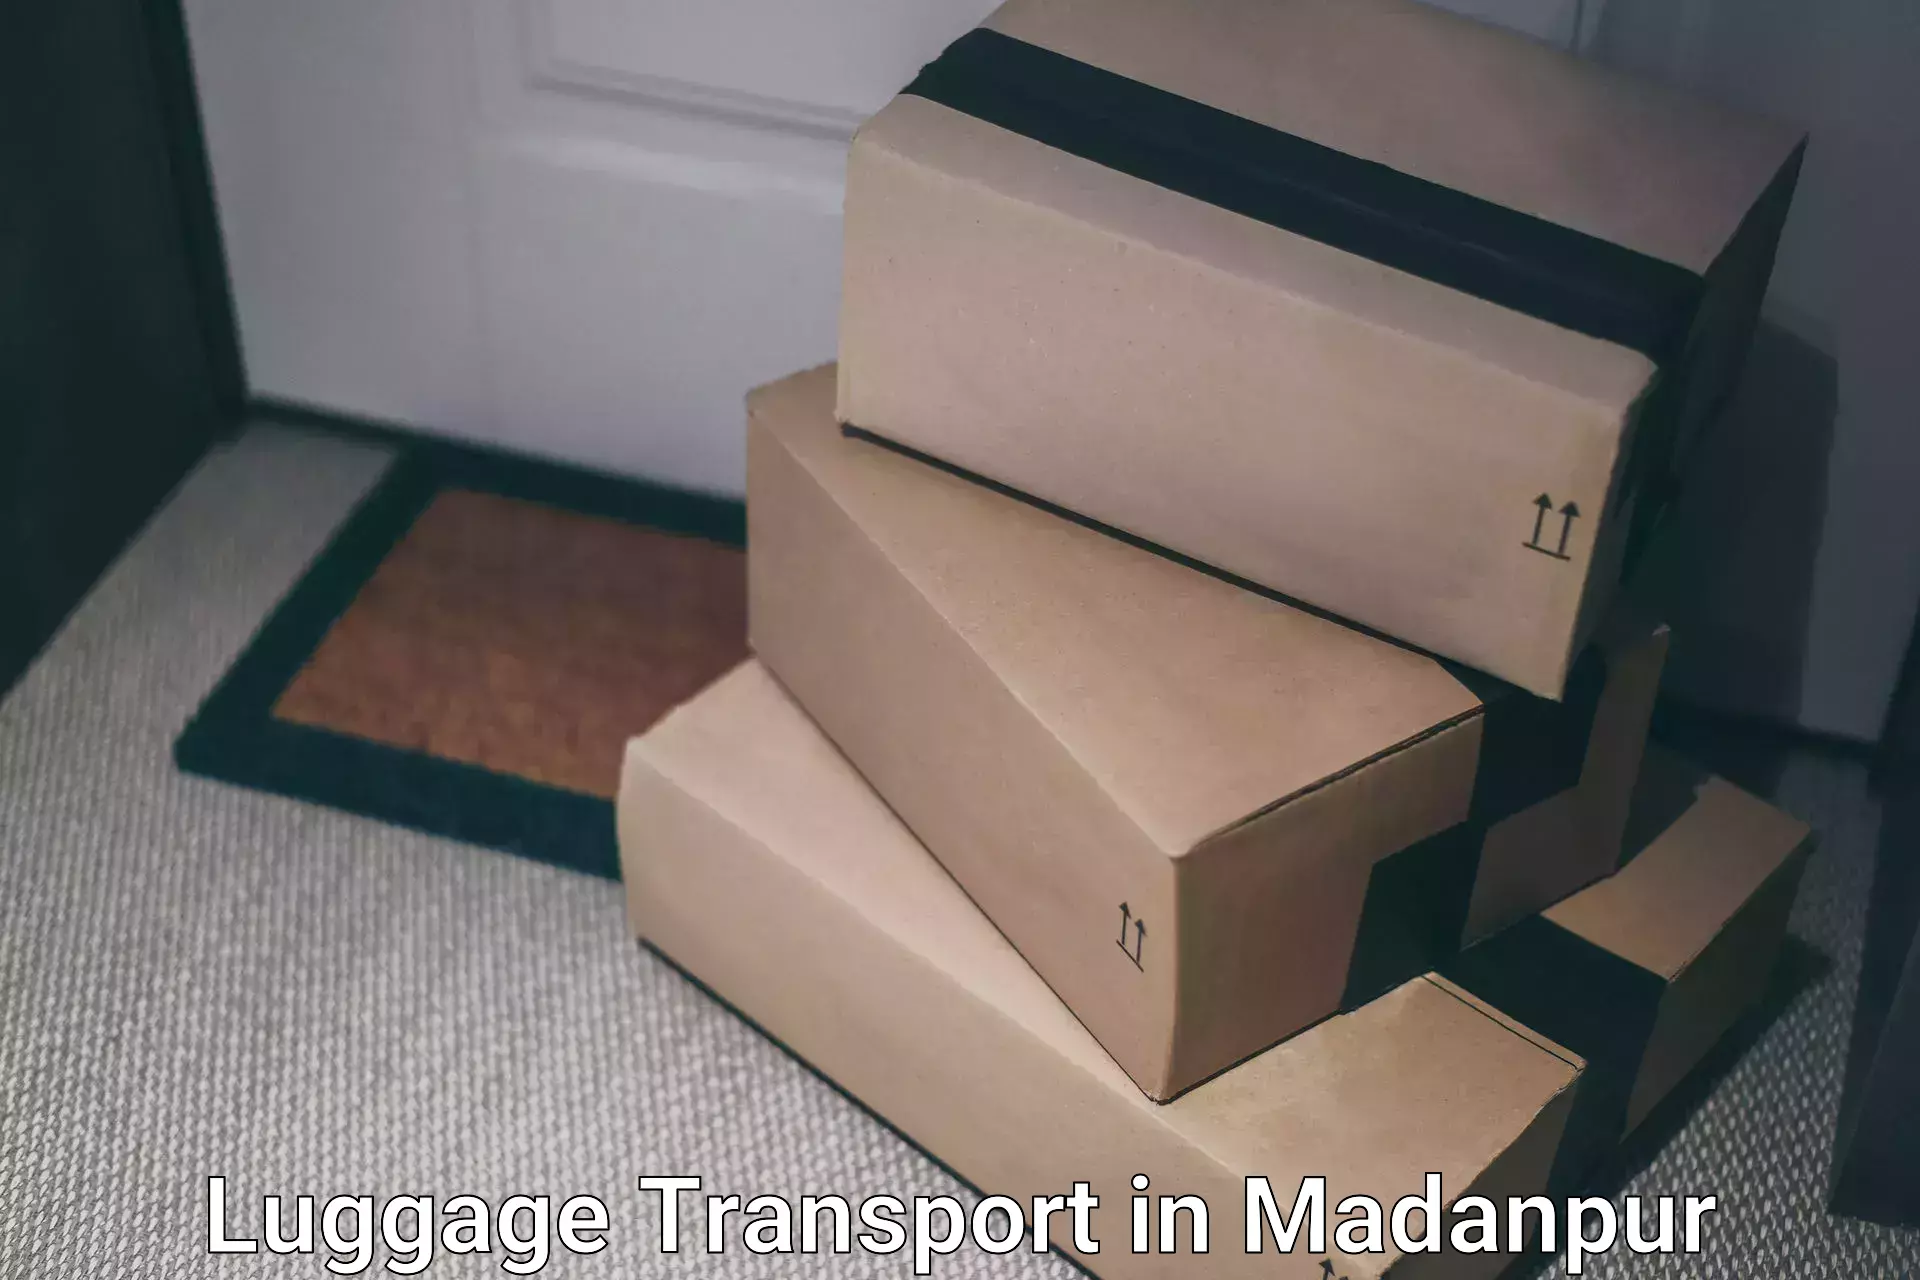 Doorstep luggage collection in Madanpur